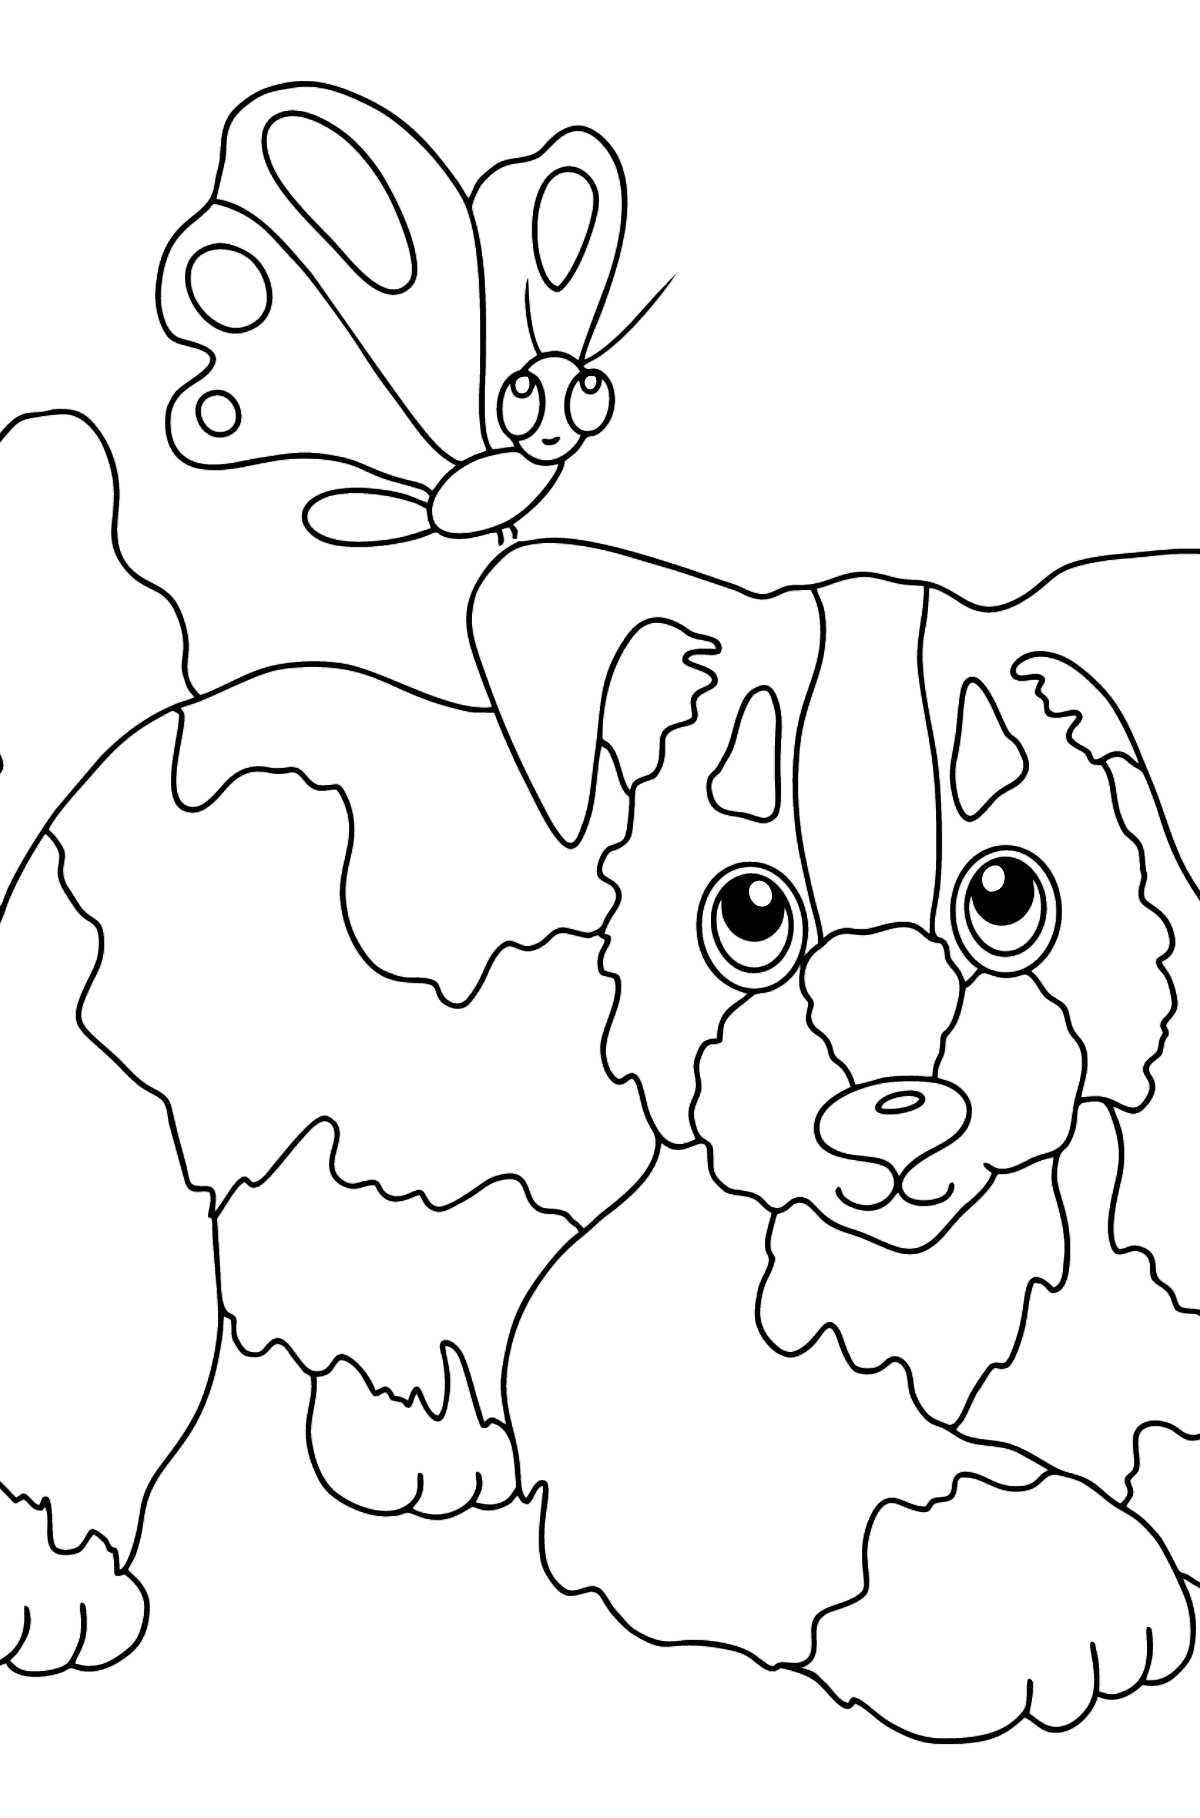 Coloring Page - A Dog is Playing with a Beautiful Butterfly - Coloring Pages for Kids